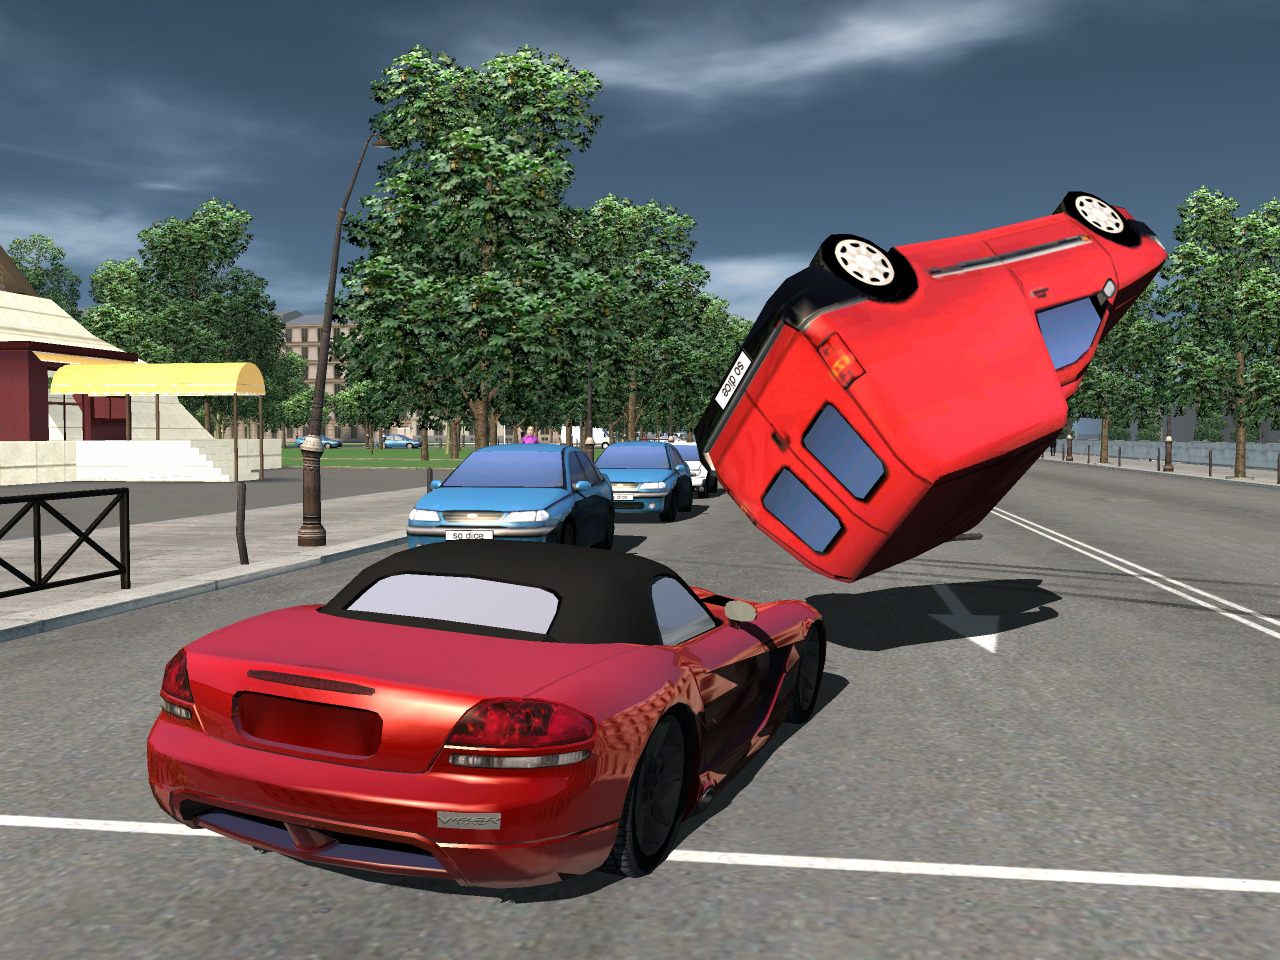 Two red cars, one is upside down in mid air.